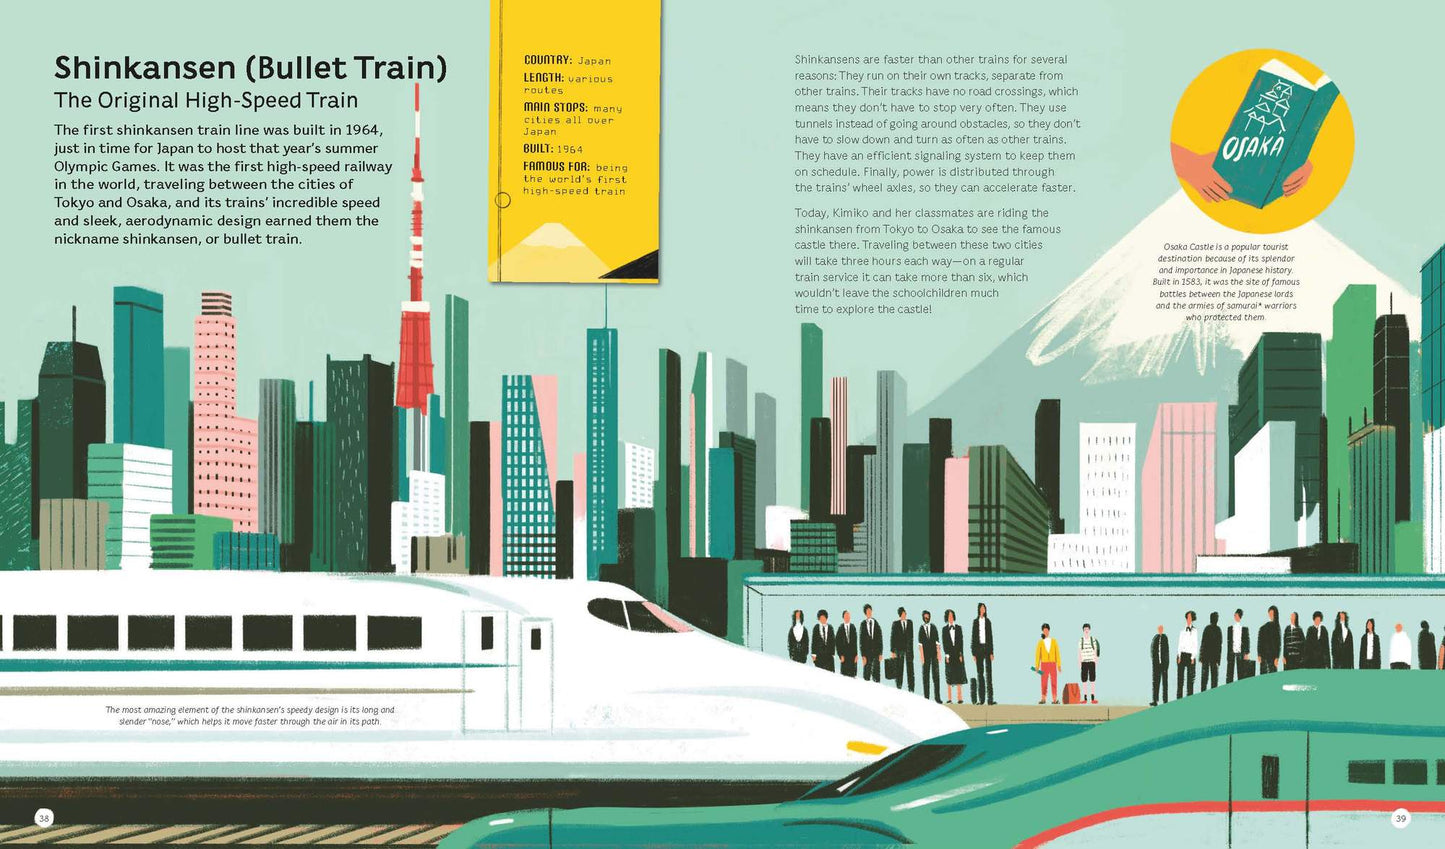 Tales of the Rails: Legendary Train Routes of the World